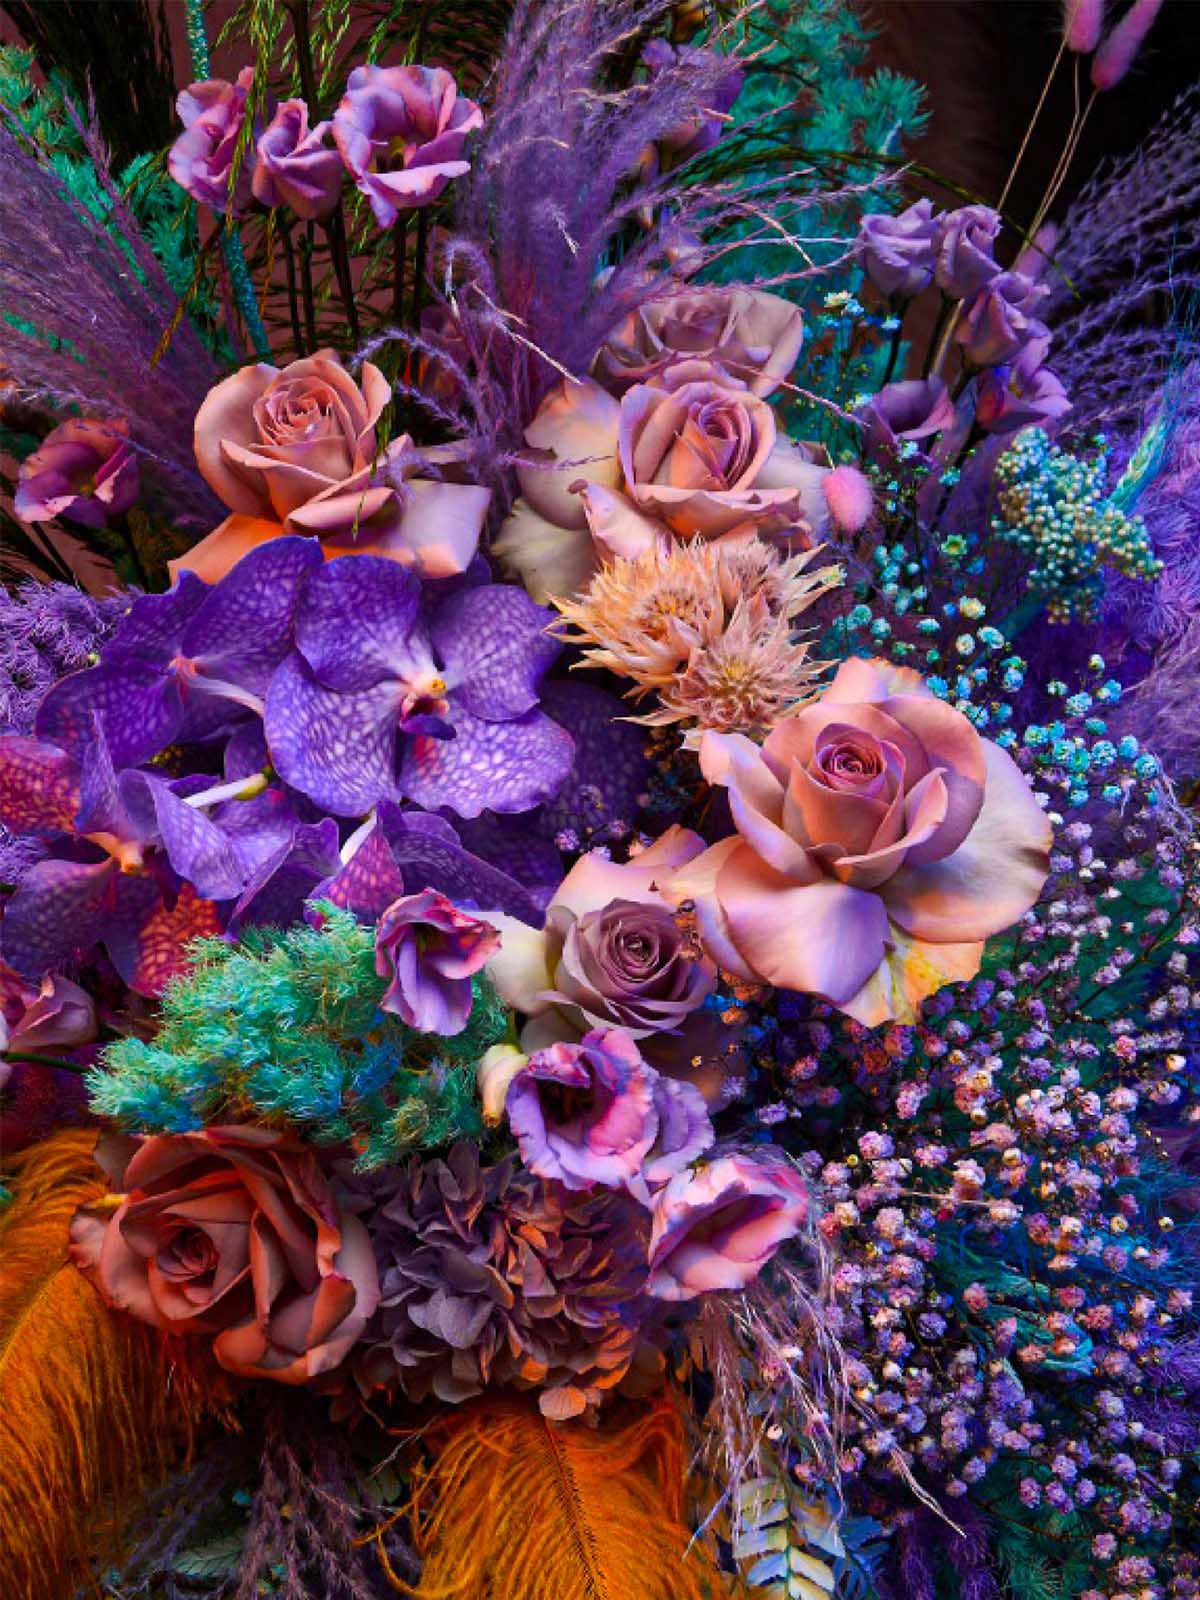 Dried Flowers Can Be Used To Illuminate Your Bouquets on Thursd